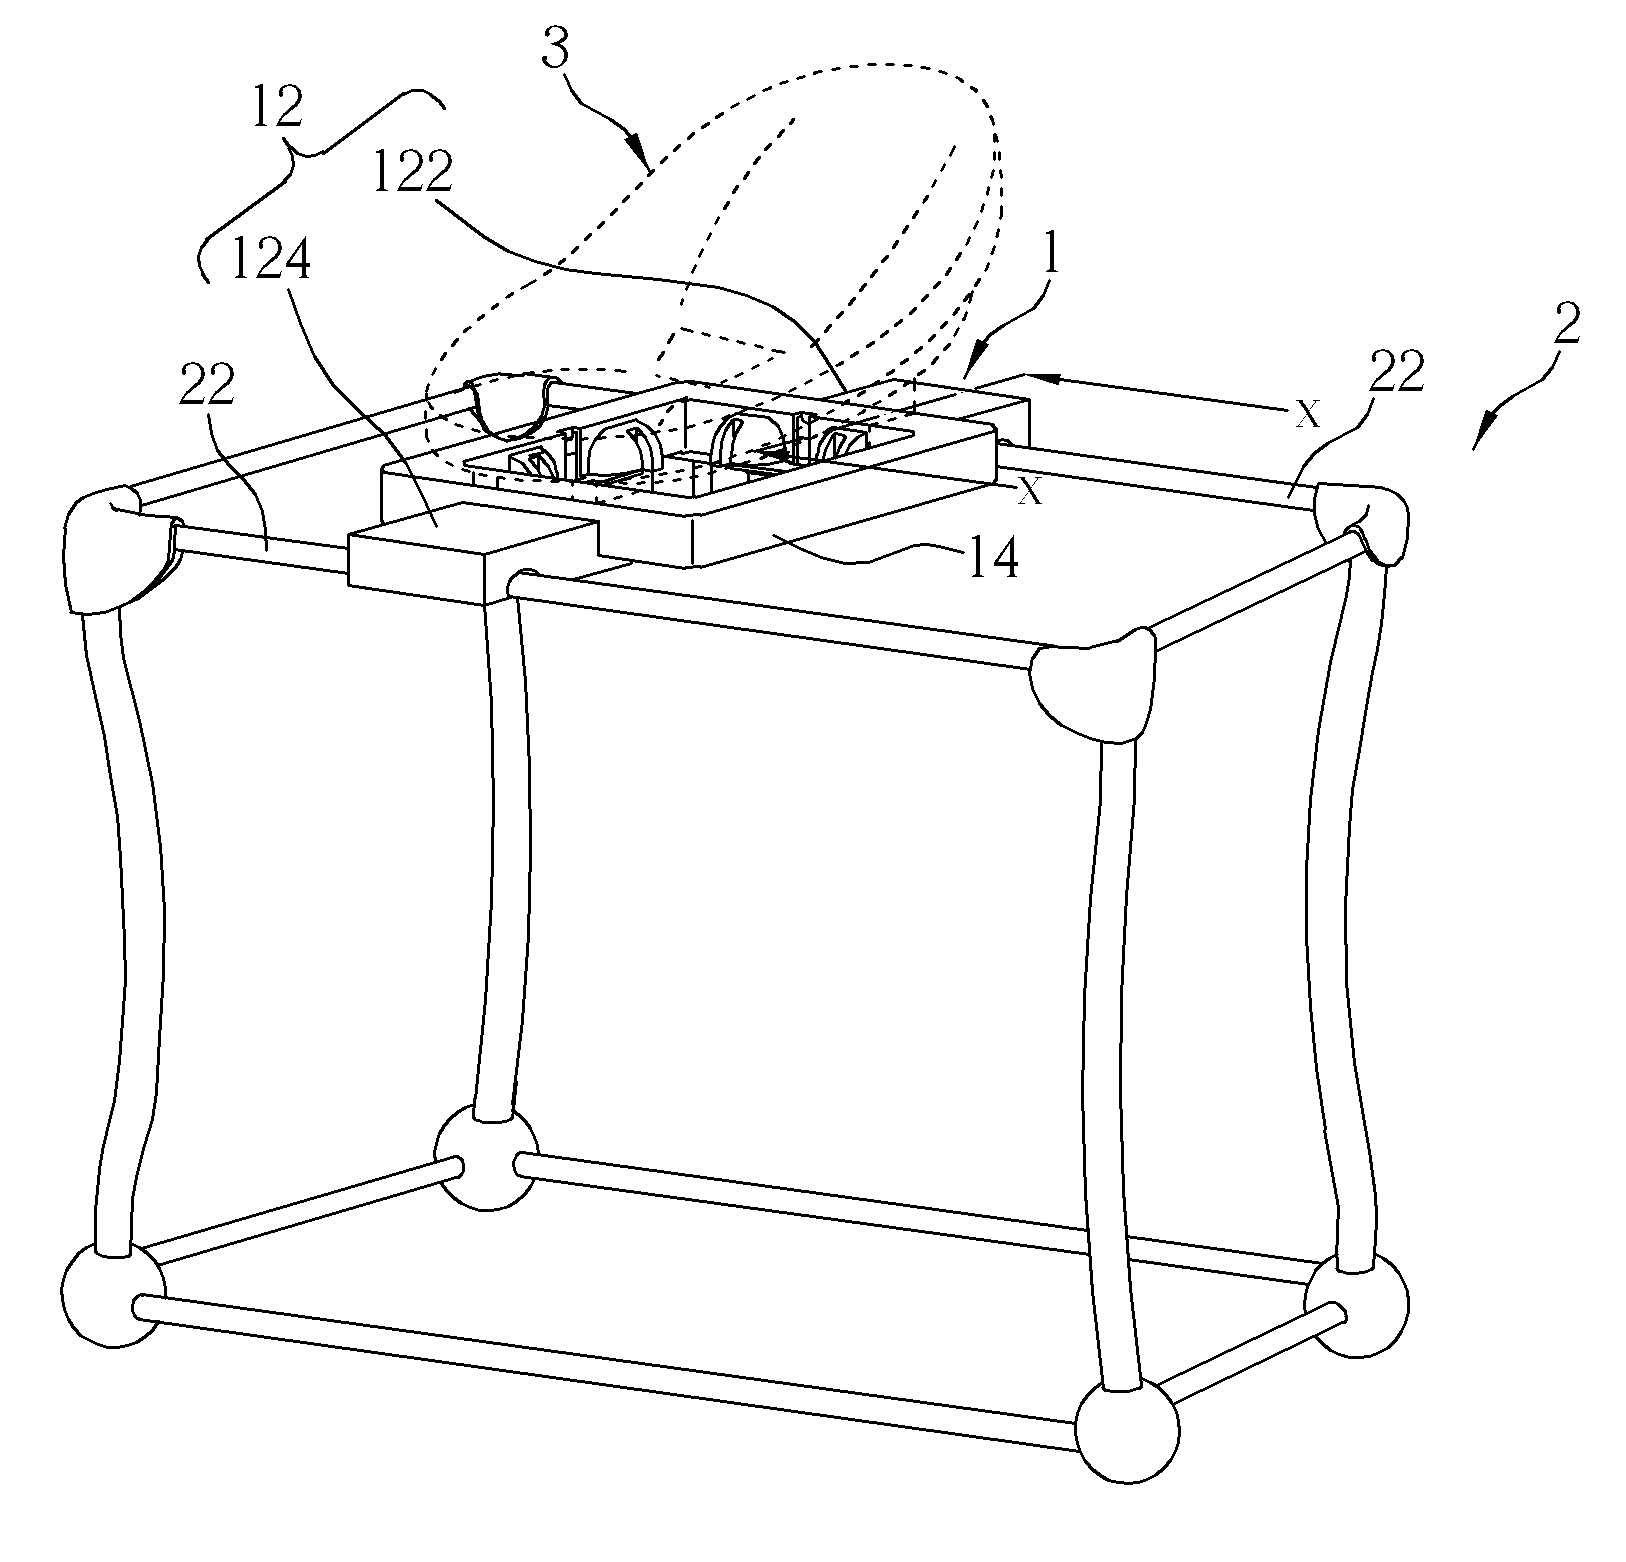 Infant-carrier docking station and crib therewith